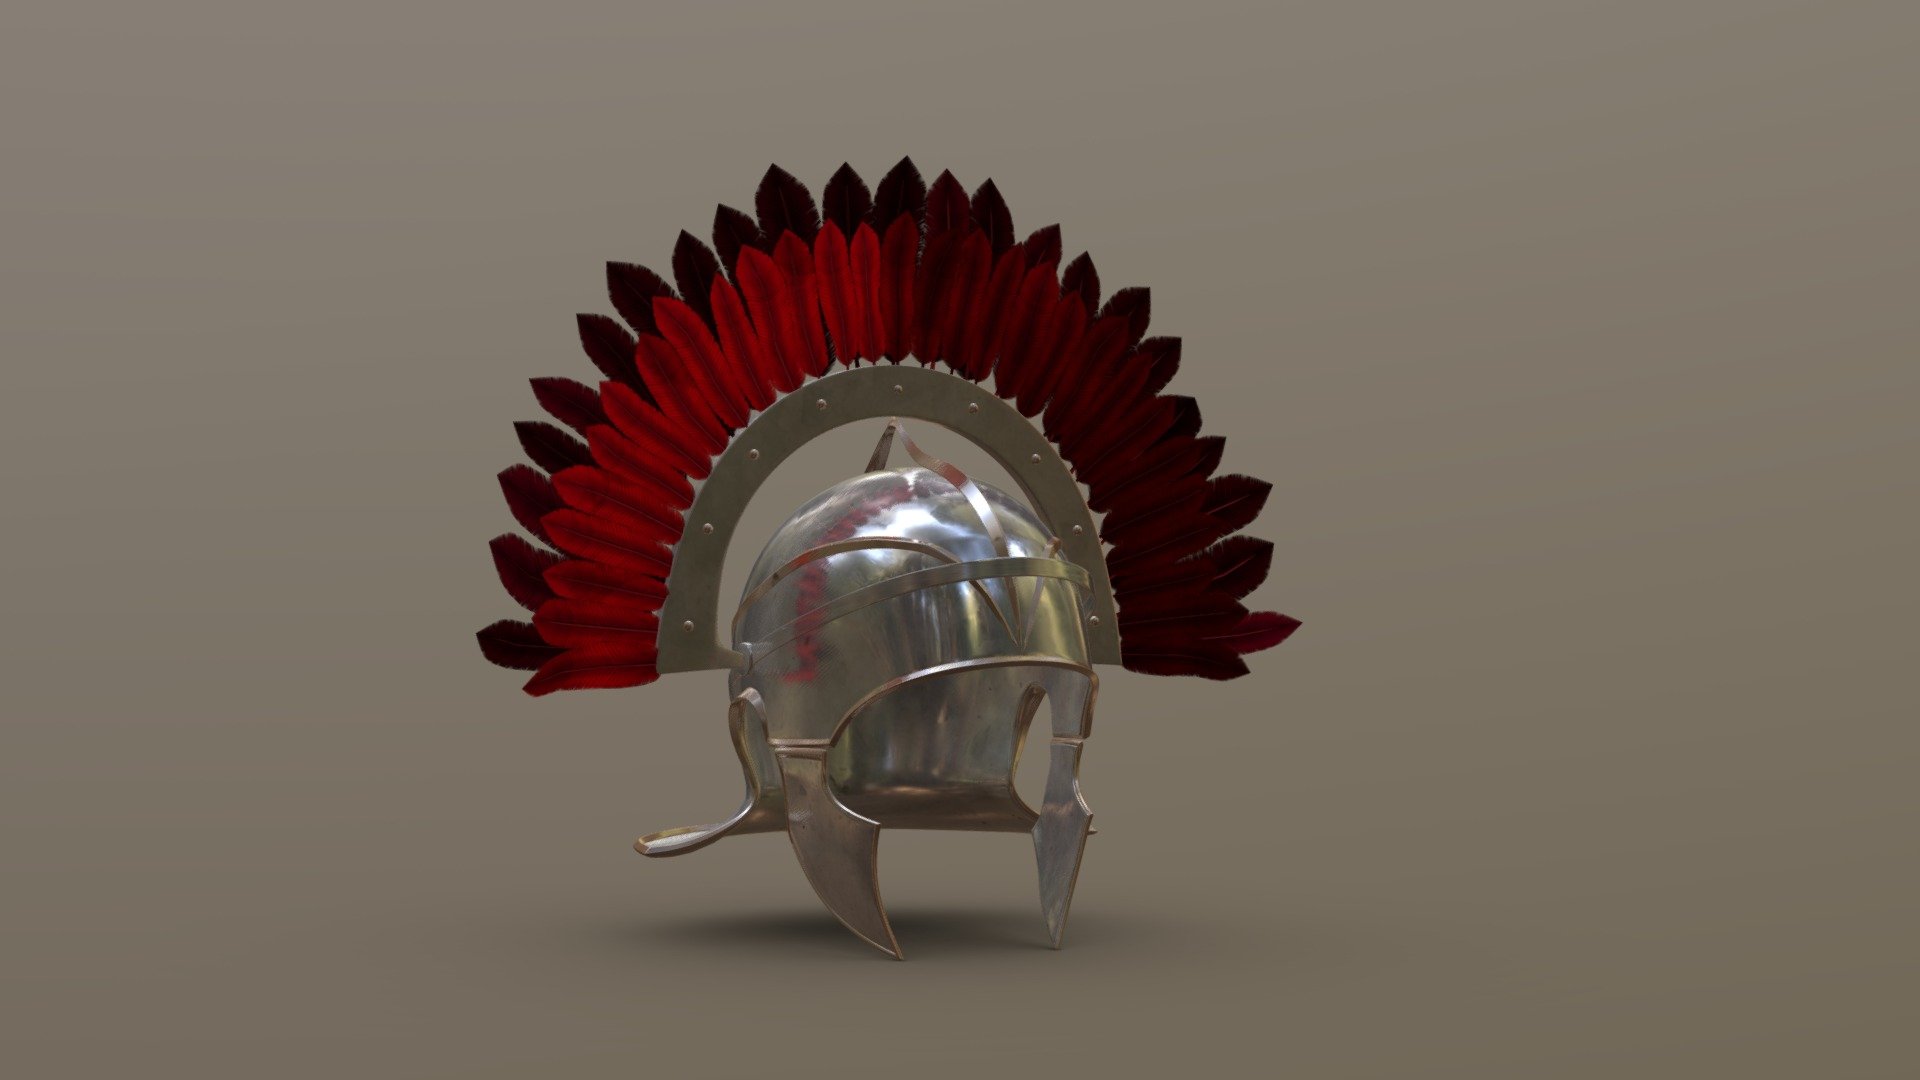 My second 3D model I've made!
This helmet was built on top of a head and has about
53k Faces. Each feather has a bone to shape it as prefered.
The feather-texure I painted by myself. 

The other textures are outsourced from AmbientCG:
Helmet Base: https://ambientcg.com/view?id=Metal006
Decorations: https://ambientcg.com/view?id=Metal008 - Centurio Helmet - 3D model by Qinzha 3d model